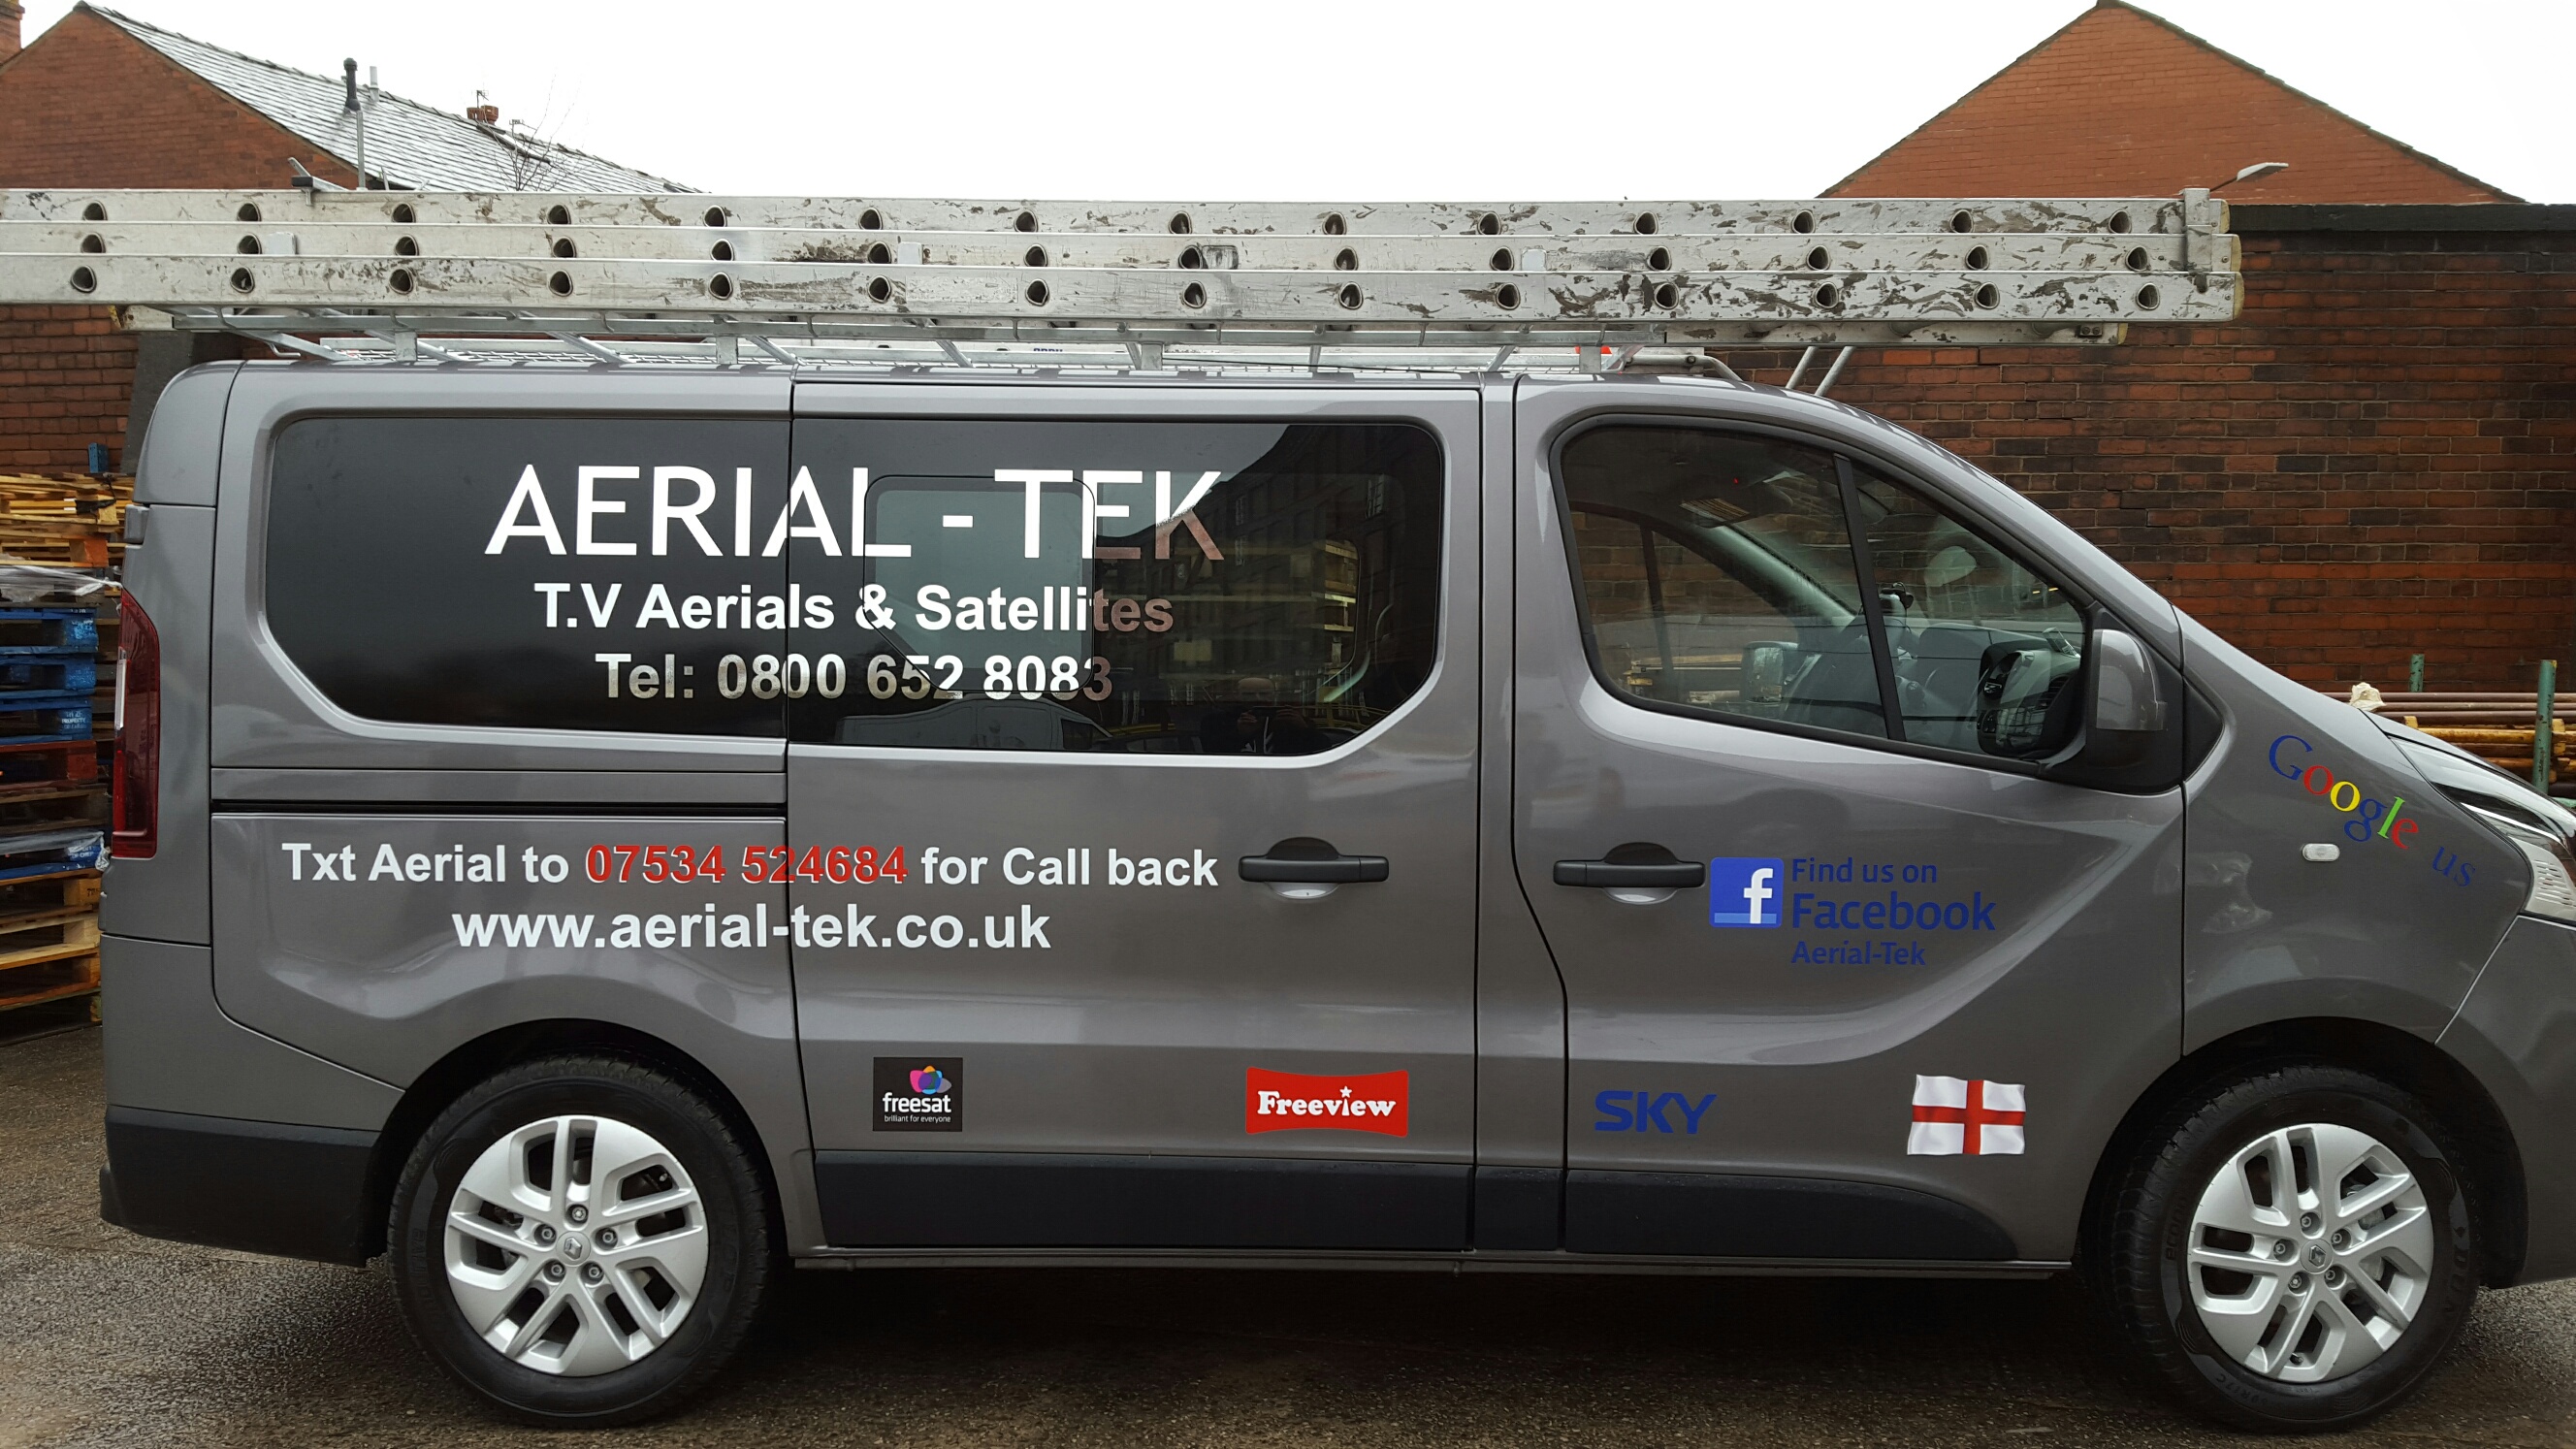 Aerial-Tek Coverage and services